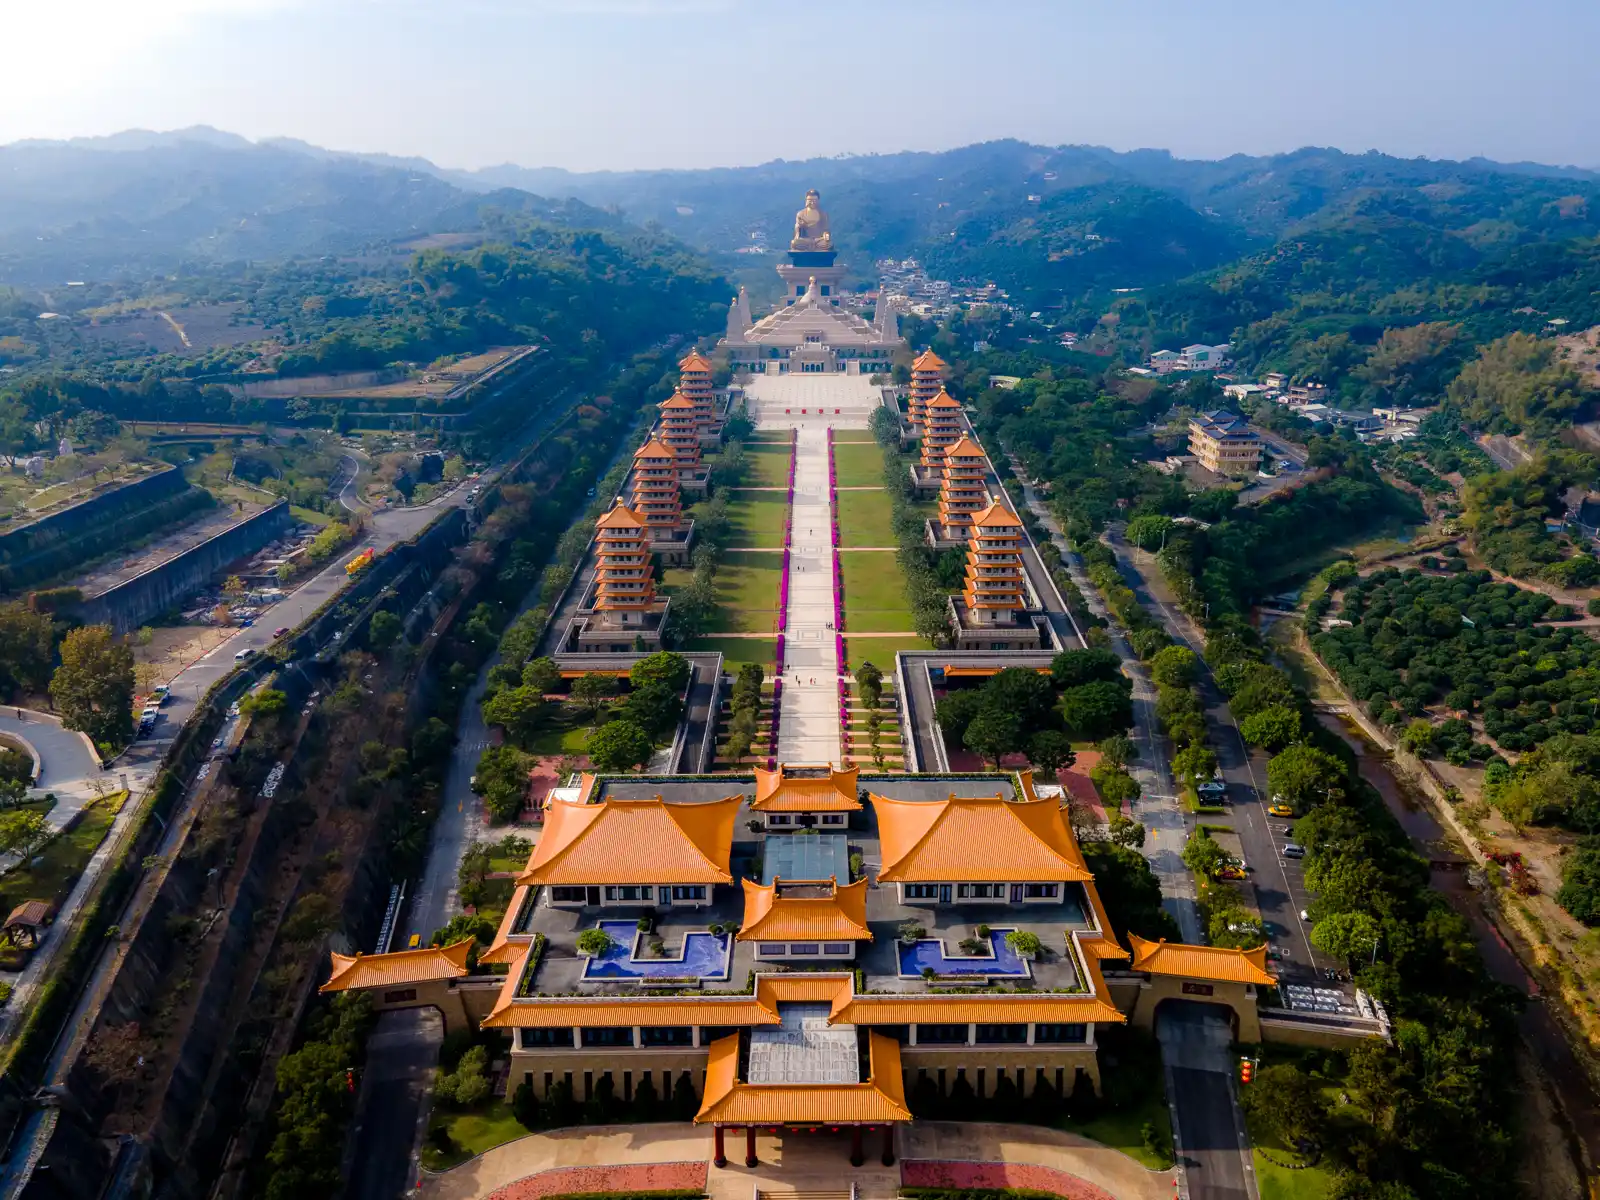 An aerial view of the Fo Guang Shan Buddha Museum, including the Front Hall, 8 Pagodas, Grand Photo Terrace, Main Hall, and Big Buddha.